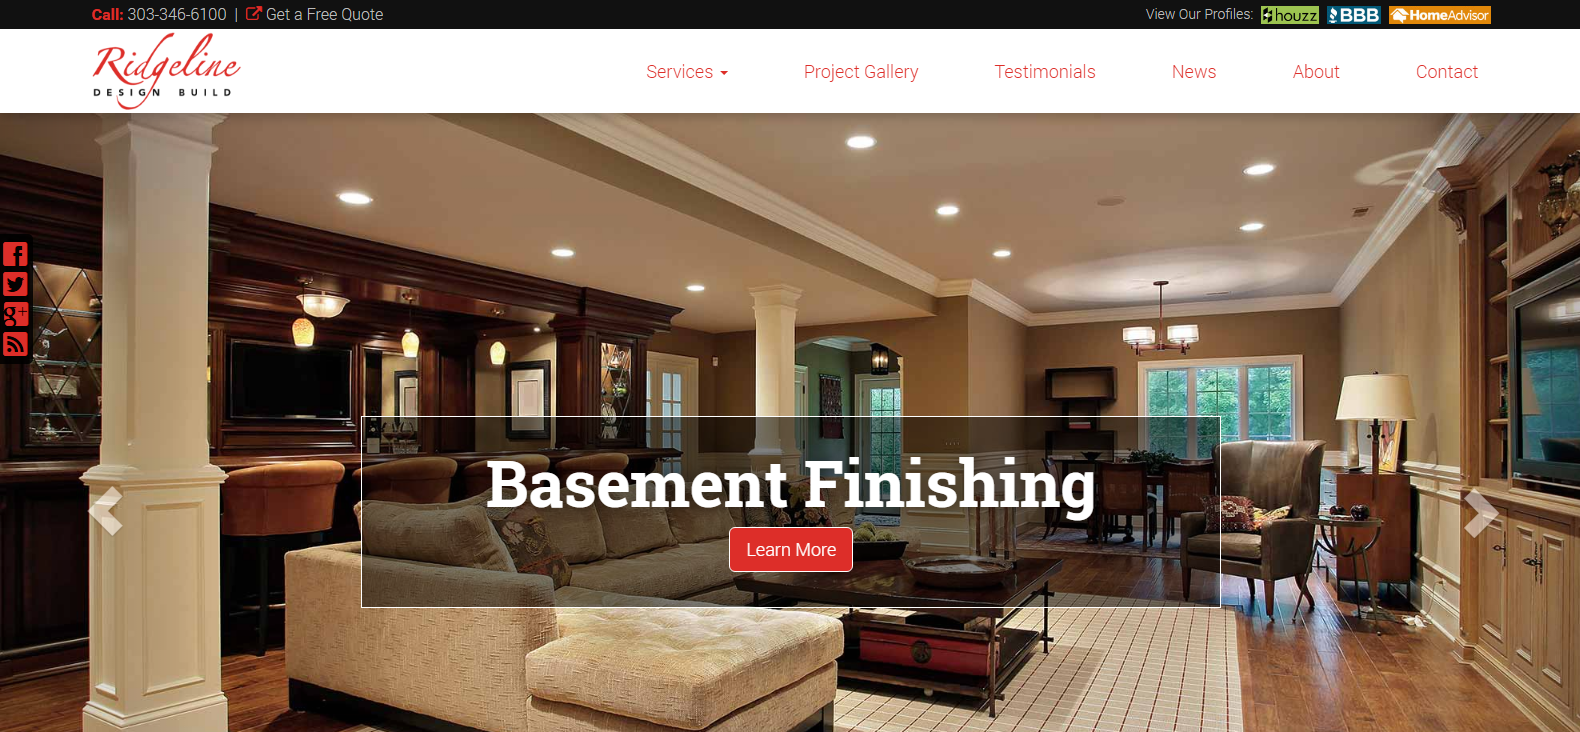 
New Website Launched: Ridgeline Remodeling, Inc.